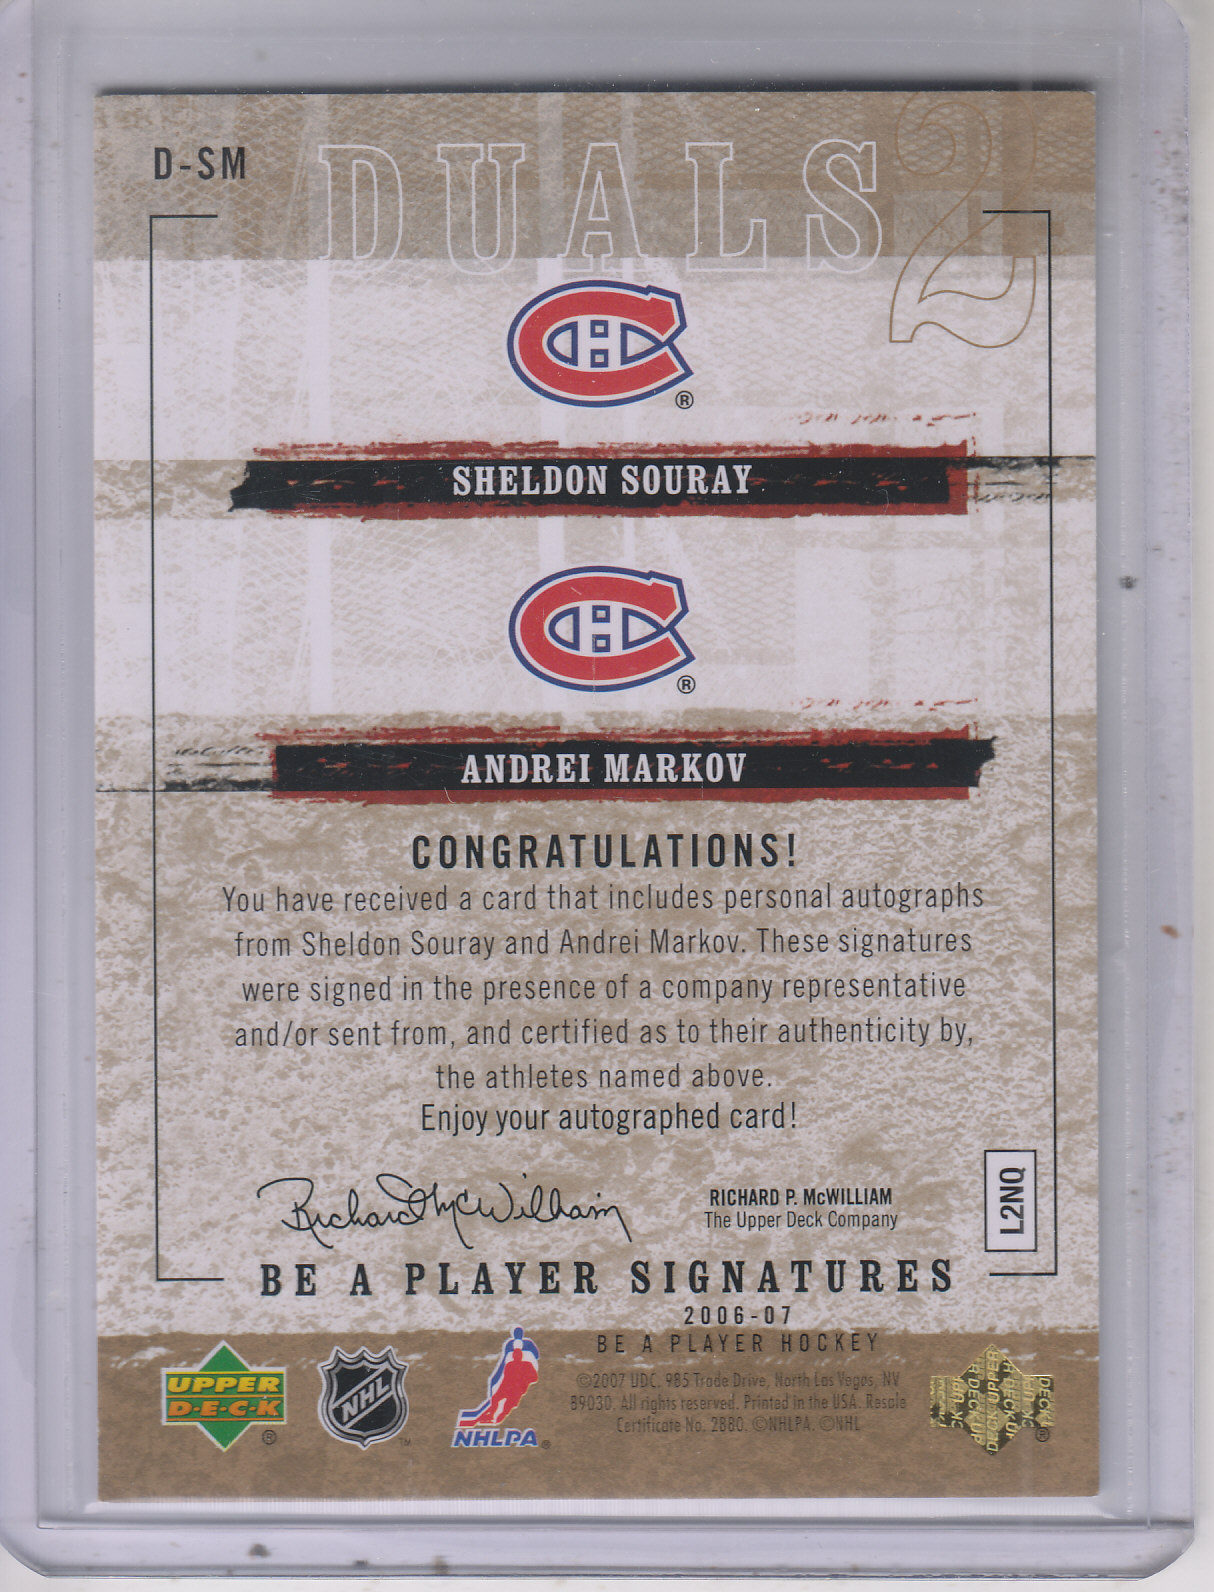 2006-07 Be A Player Signatures Duals #DSM Andrei Markov/Sheldon Souray back image